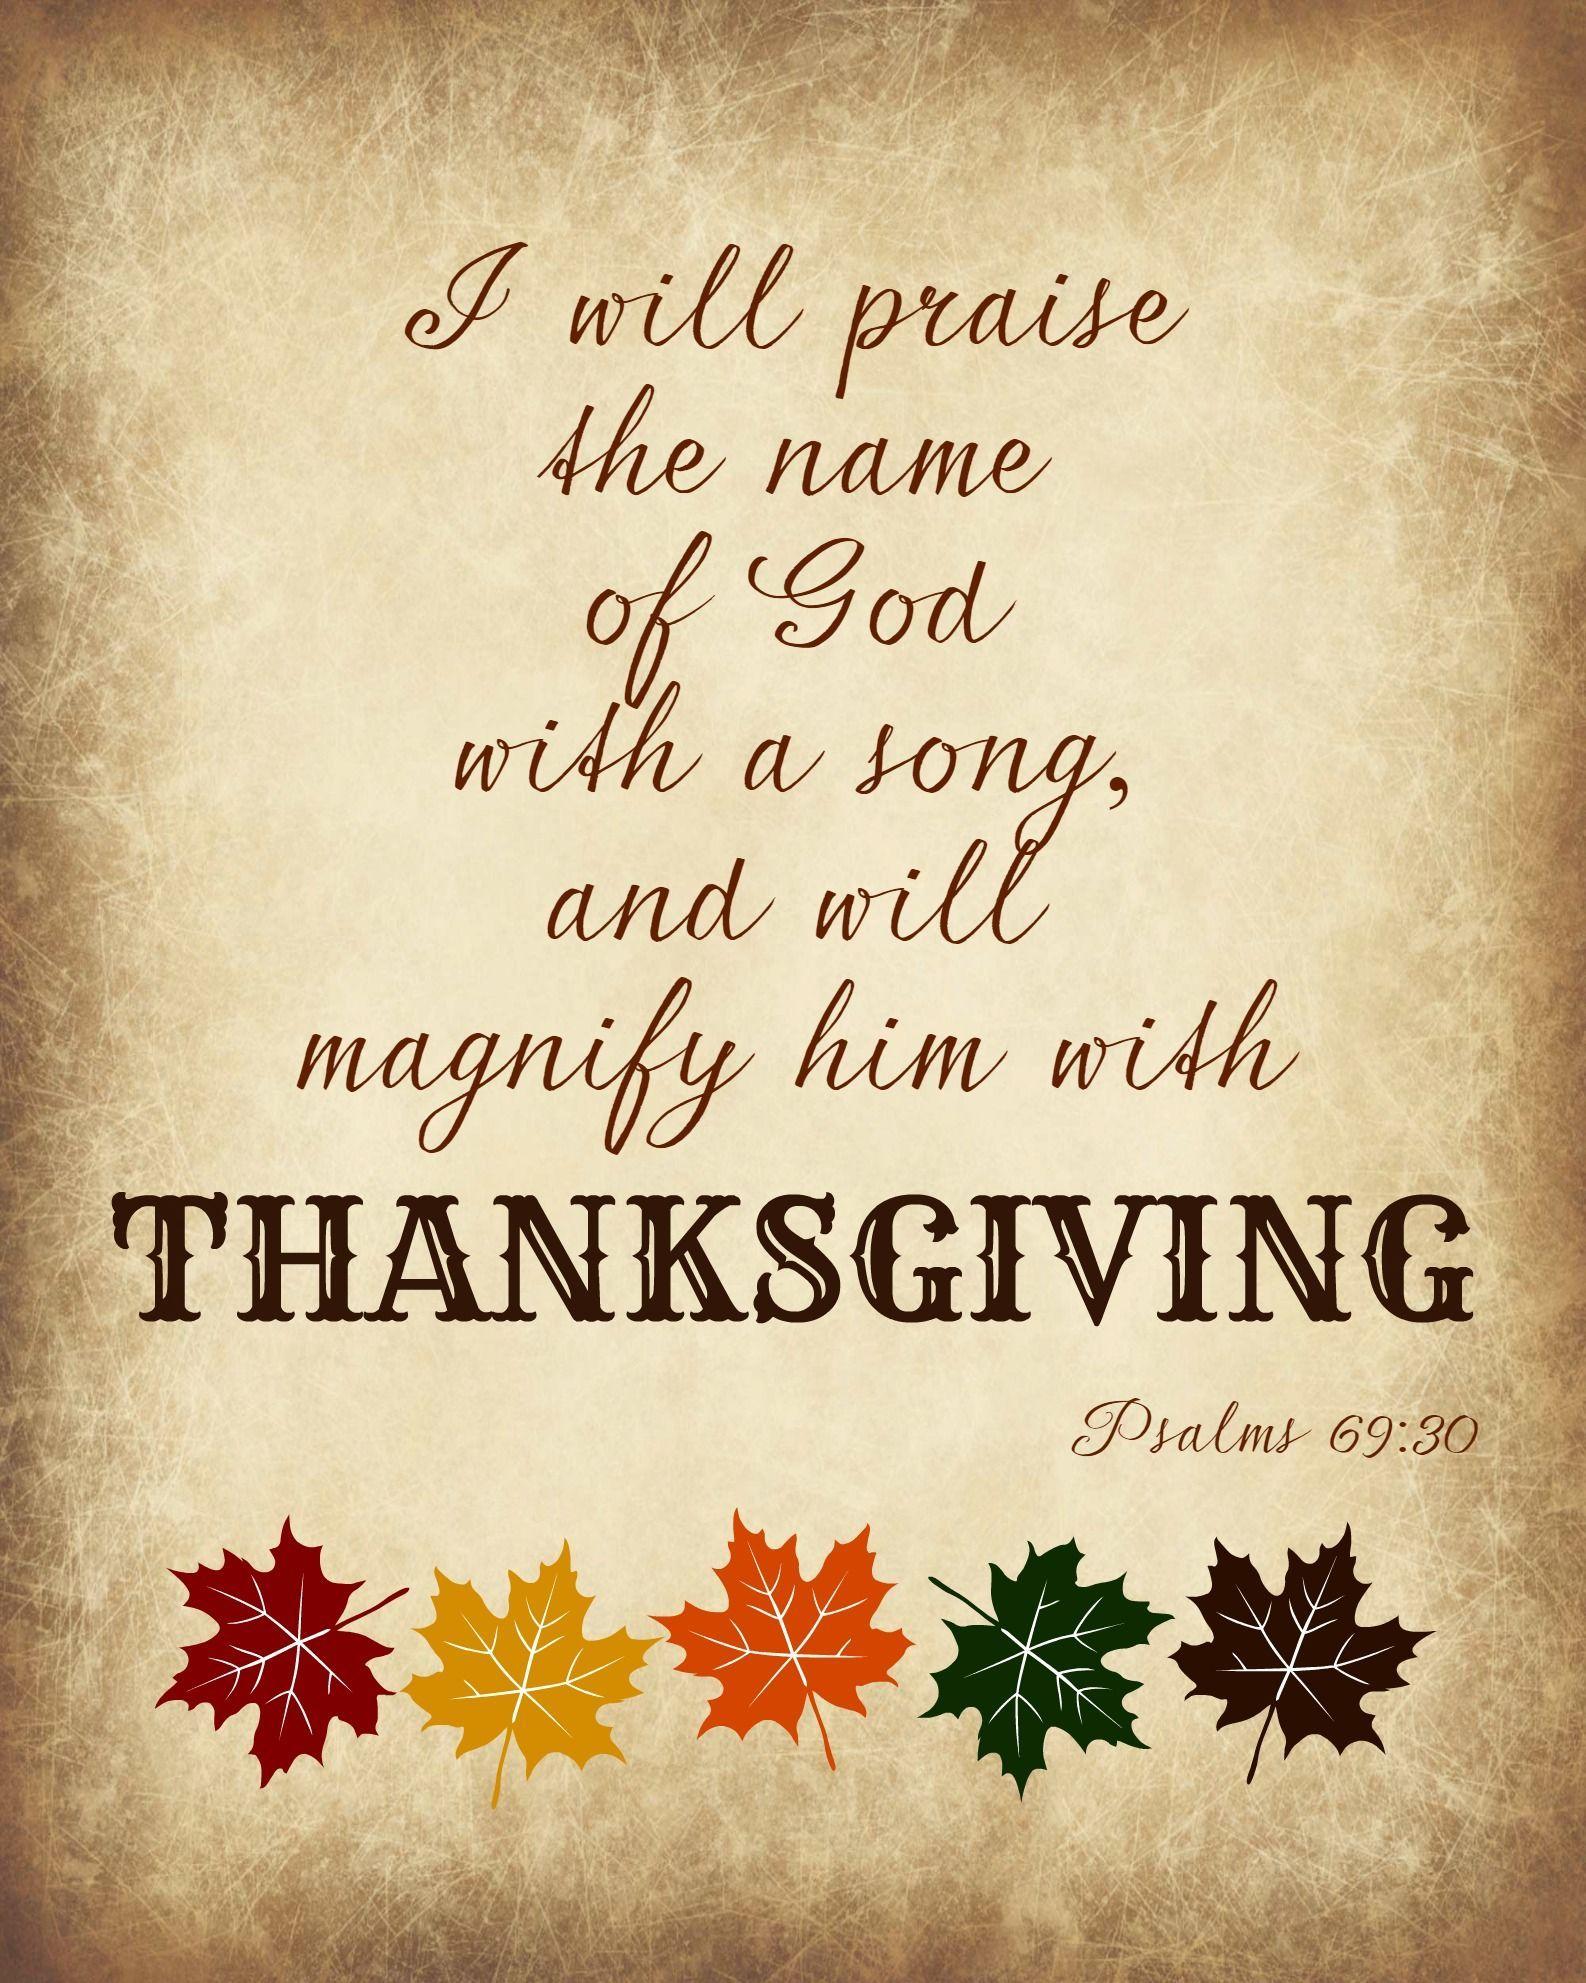 Happy Thanksgiving Bible Verse Images - Printable Template Calendar